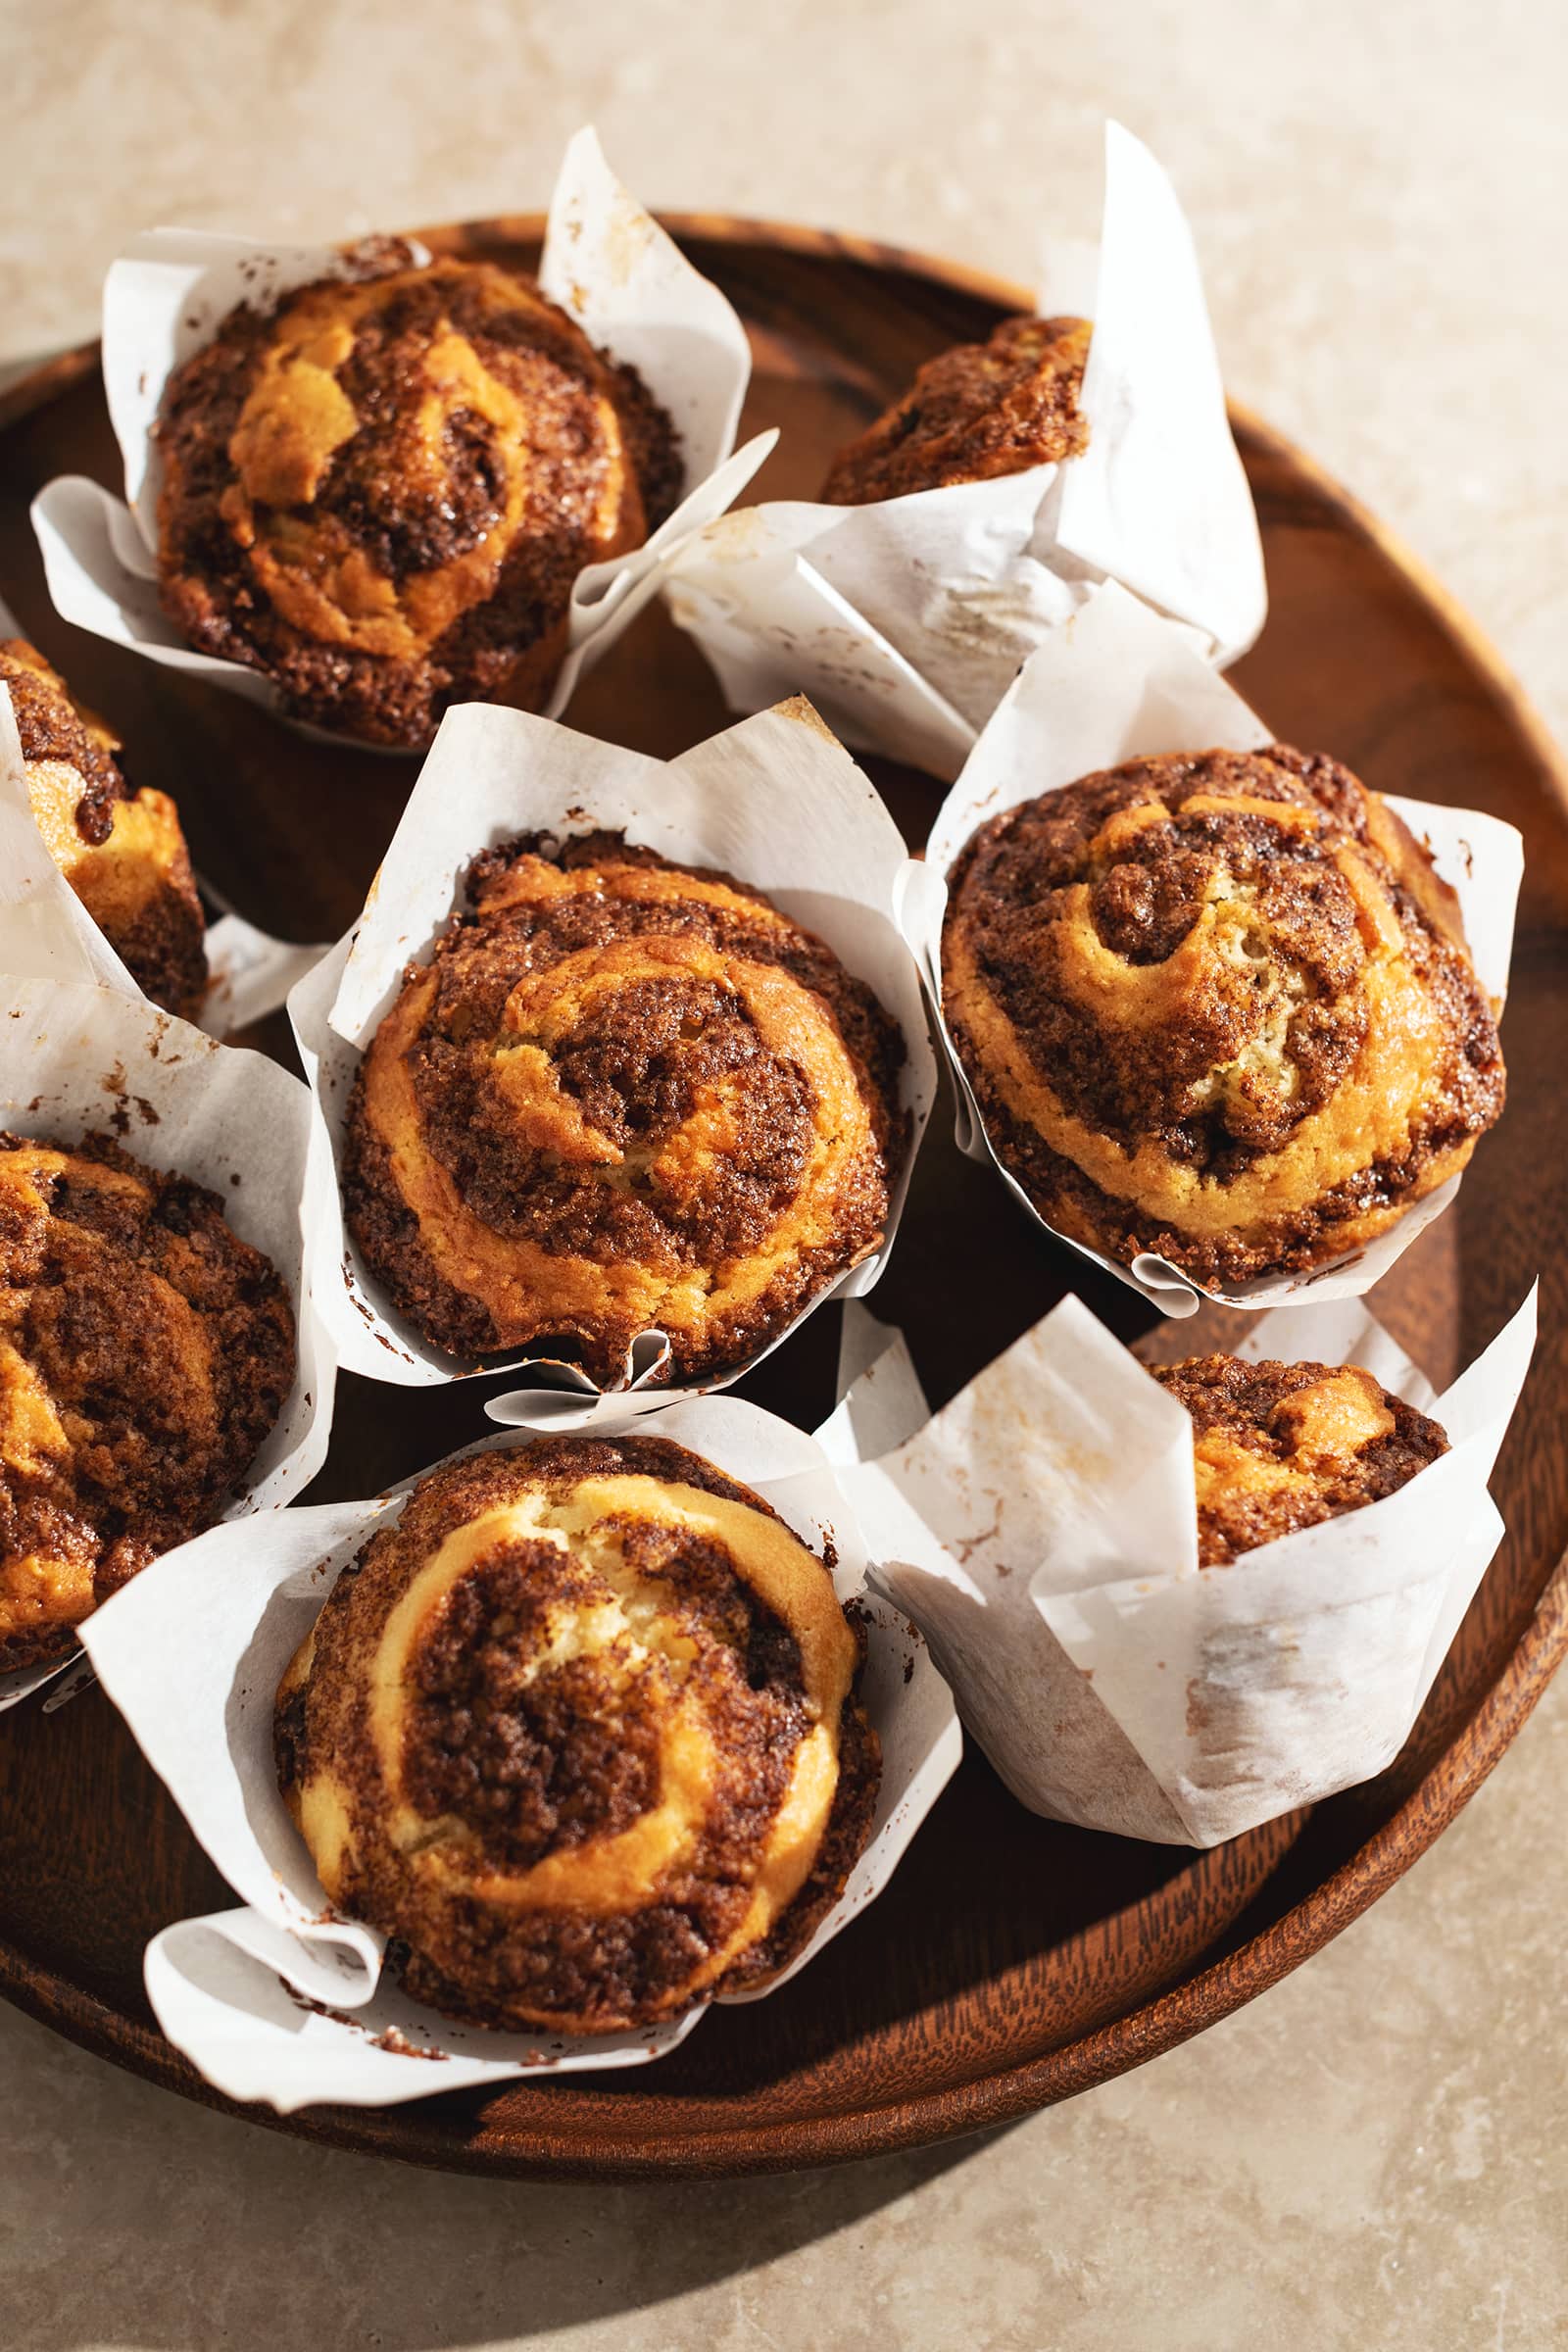 Several cinnamon roll muffins on a wooden platter.